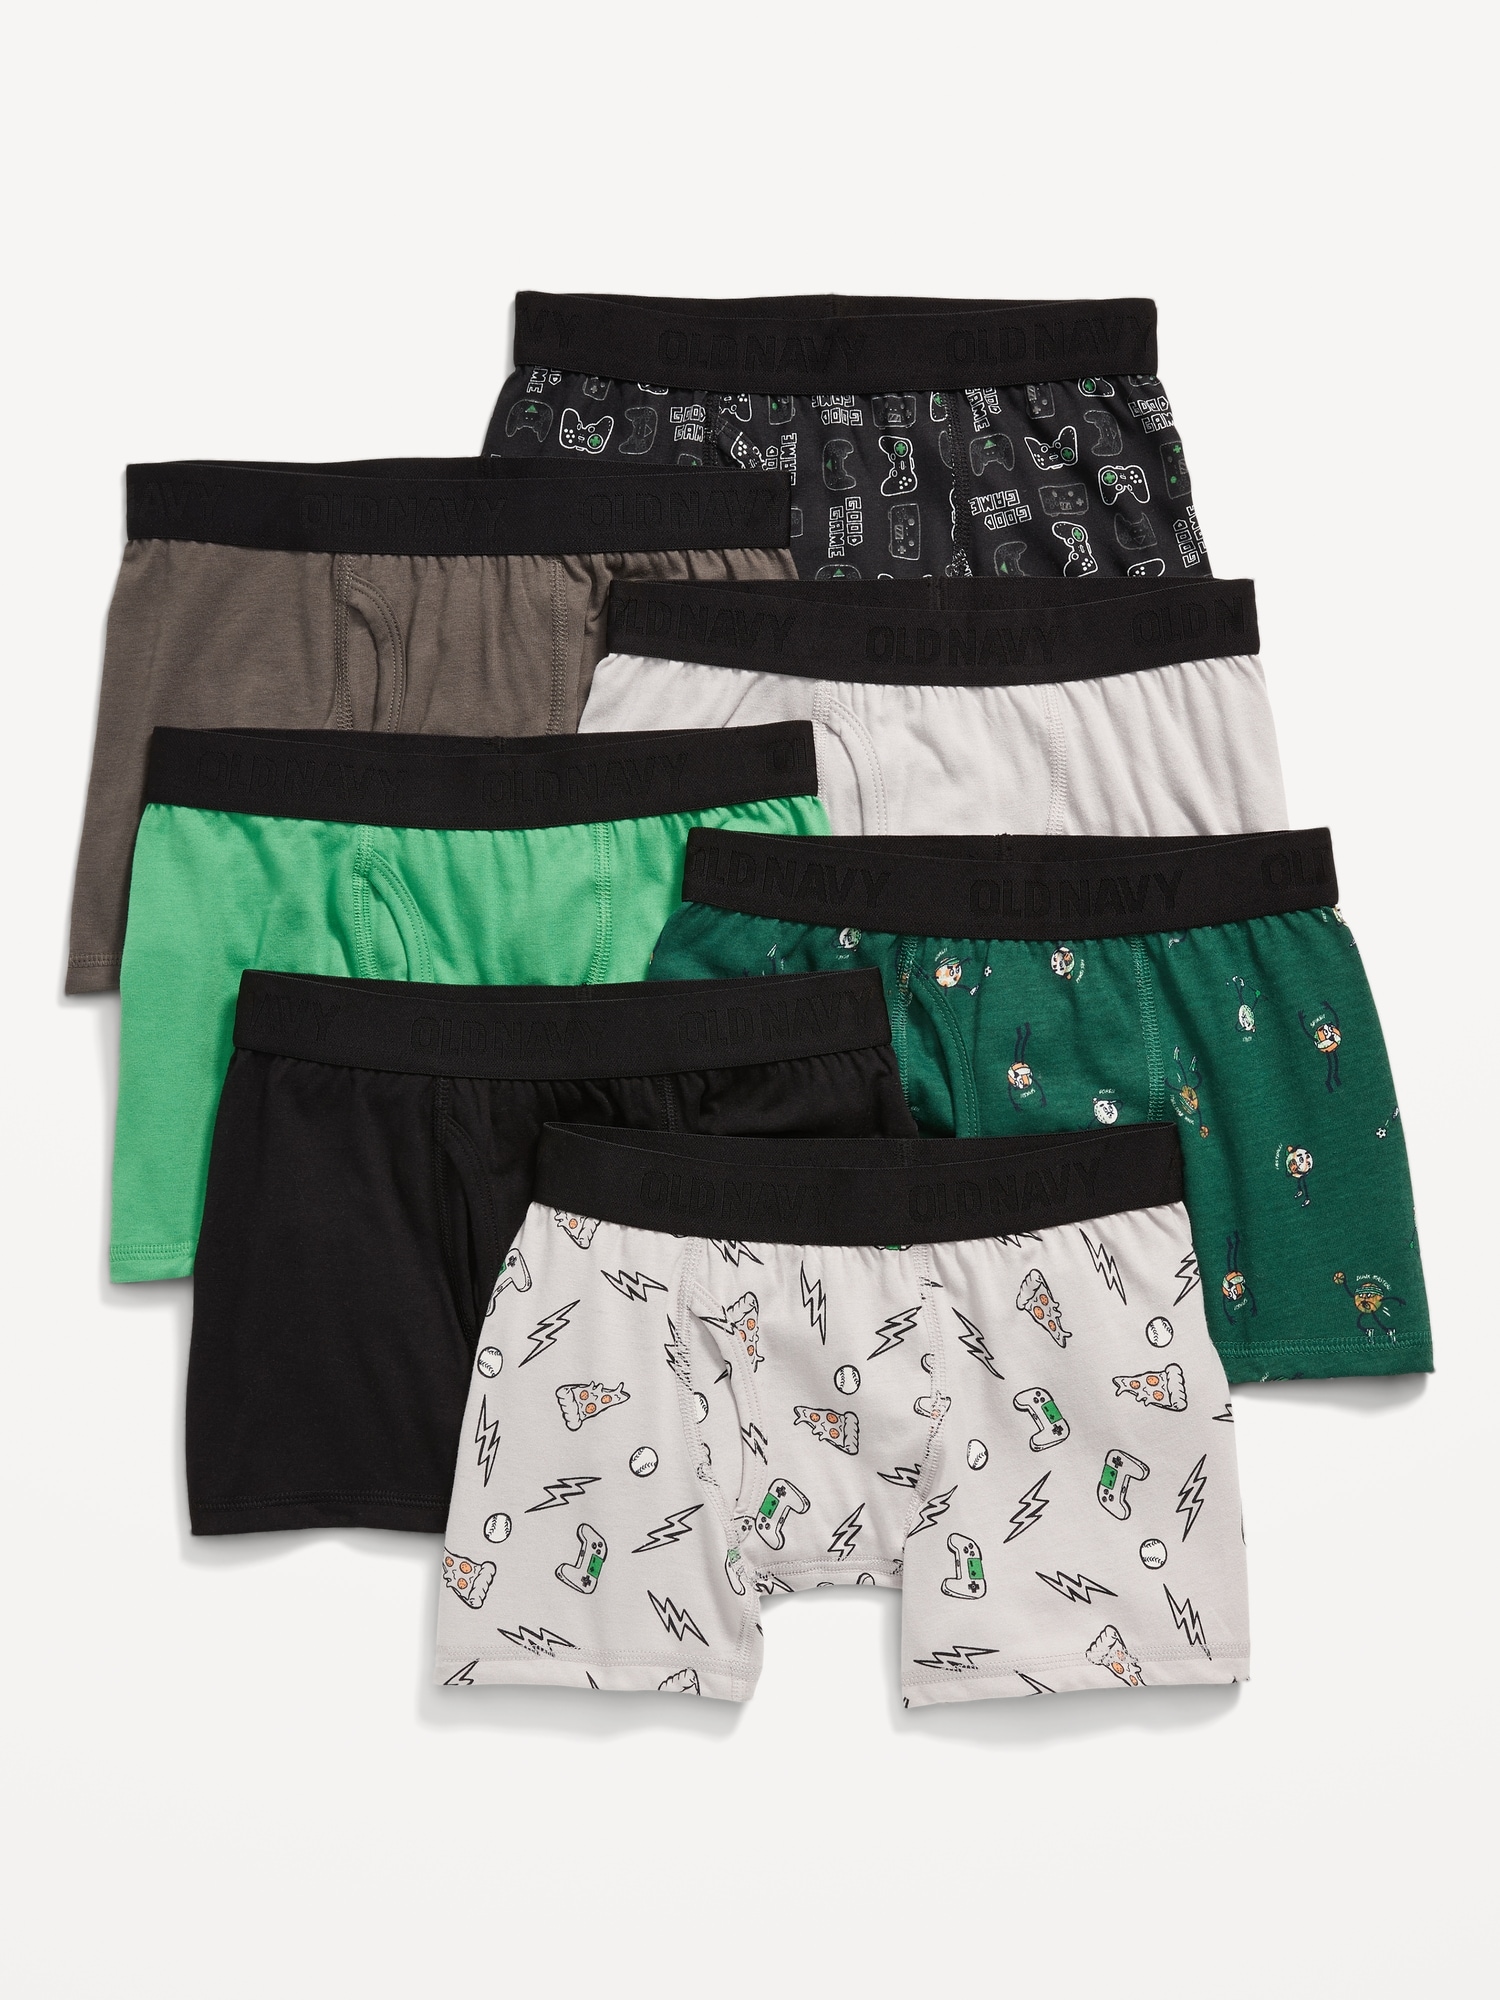 Biofresh Boy Children's Antimicrobial Boxer Brief 3 pieces in a pack UCBBG8